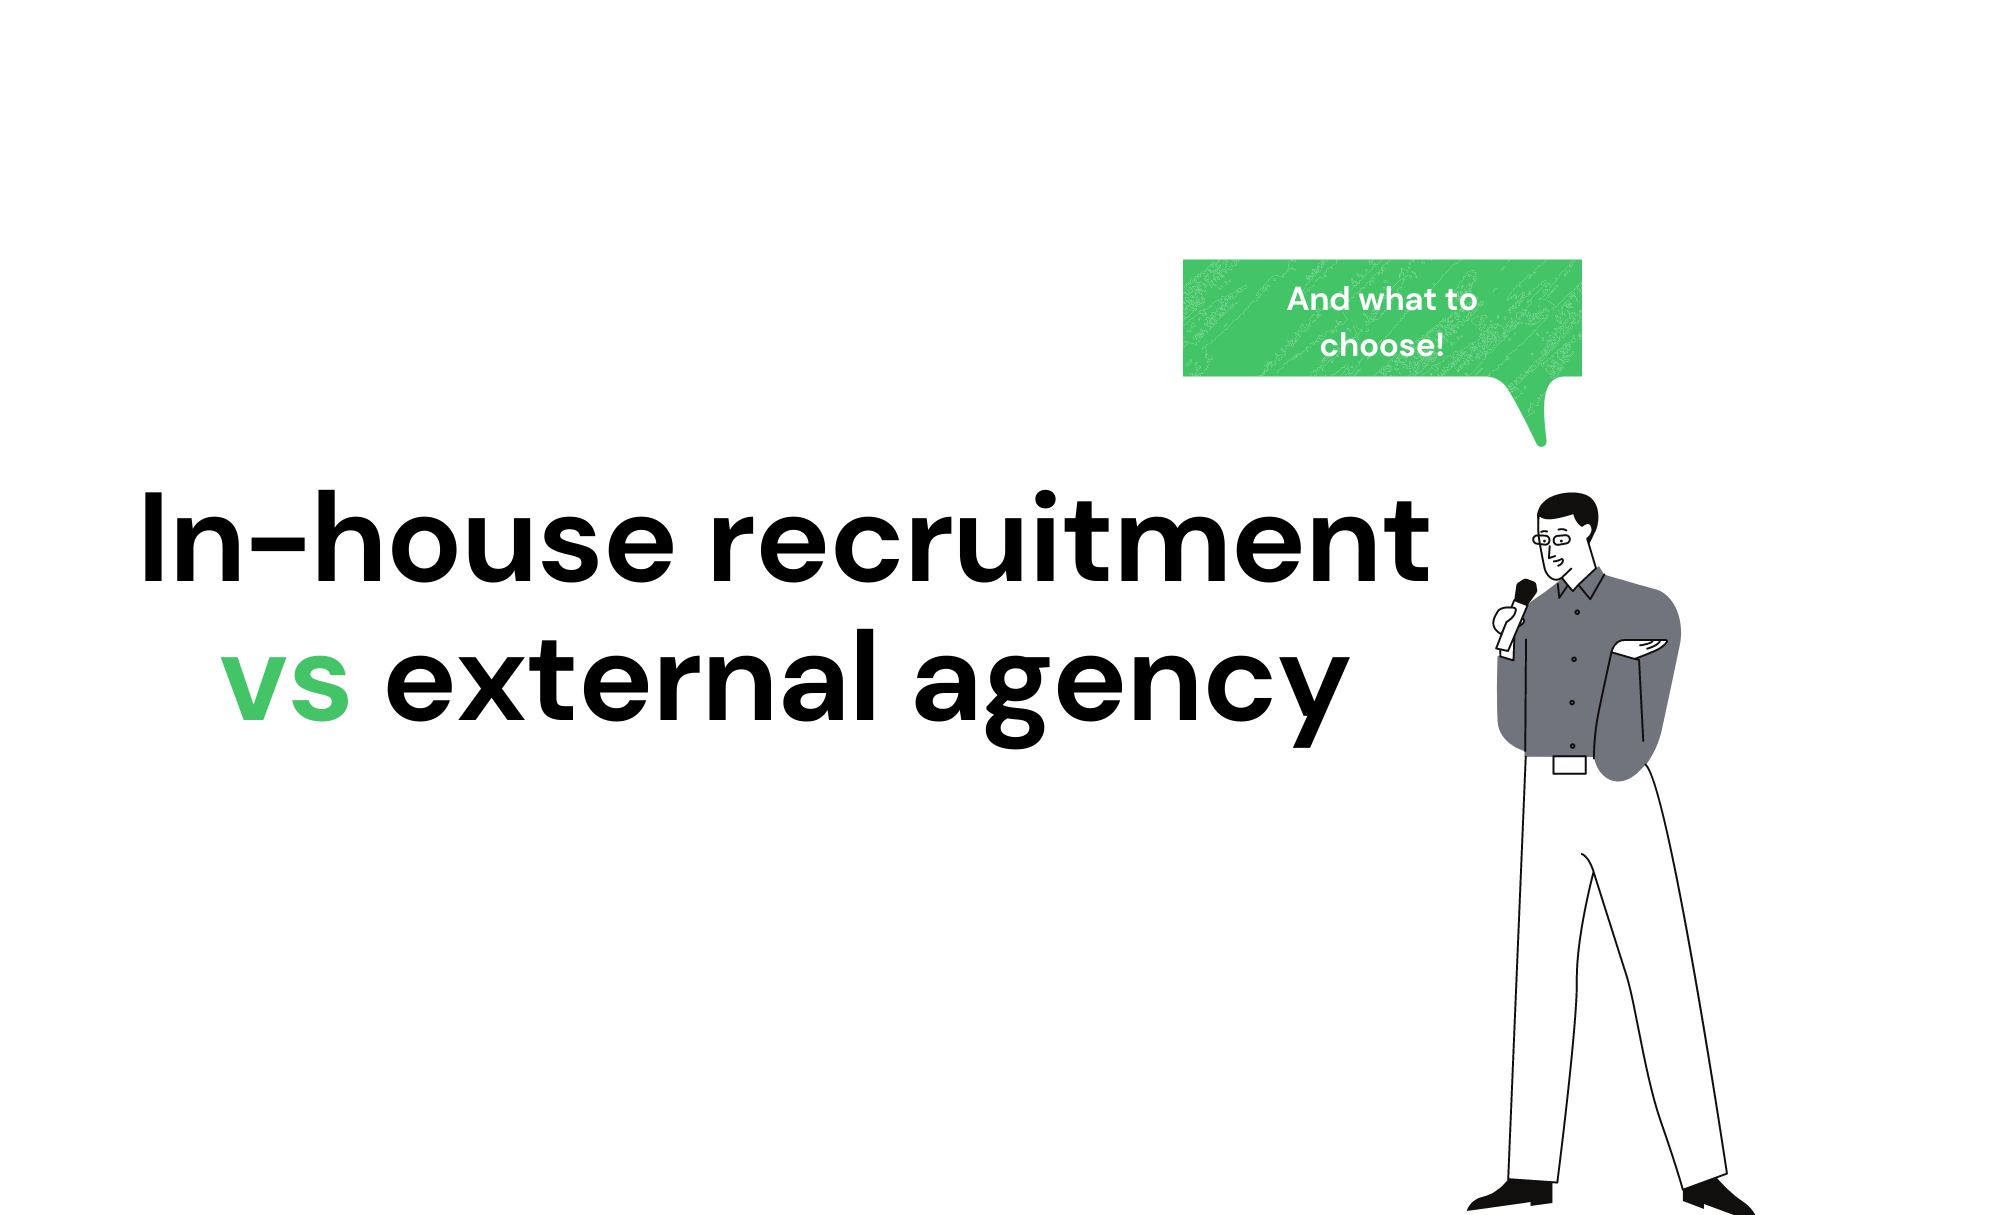 In house recruitment vs external agency – the pros and cons and what to choose